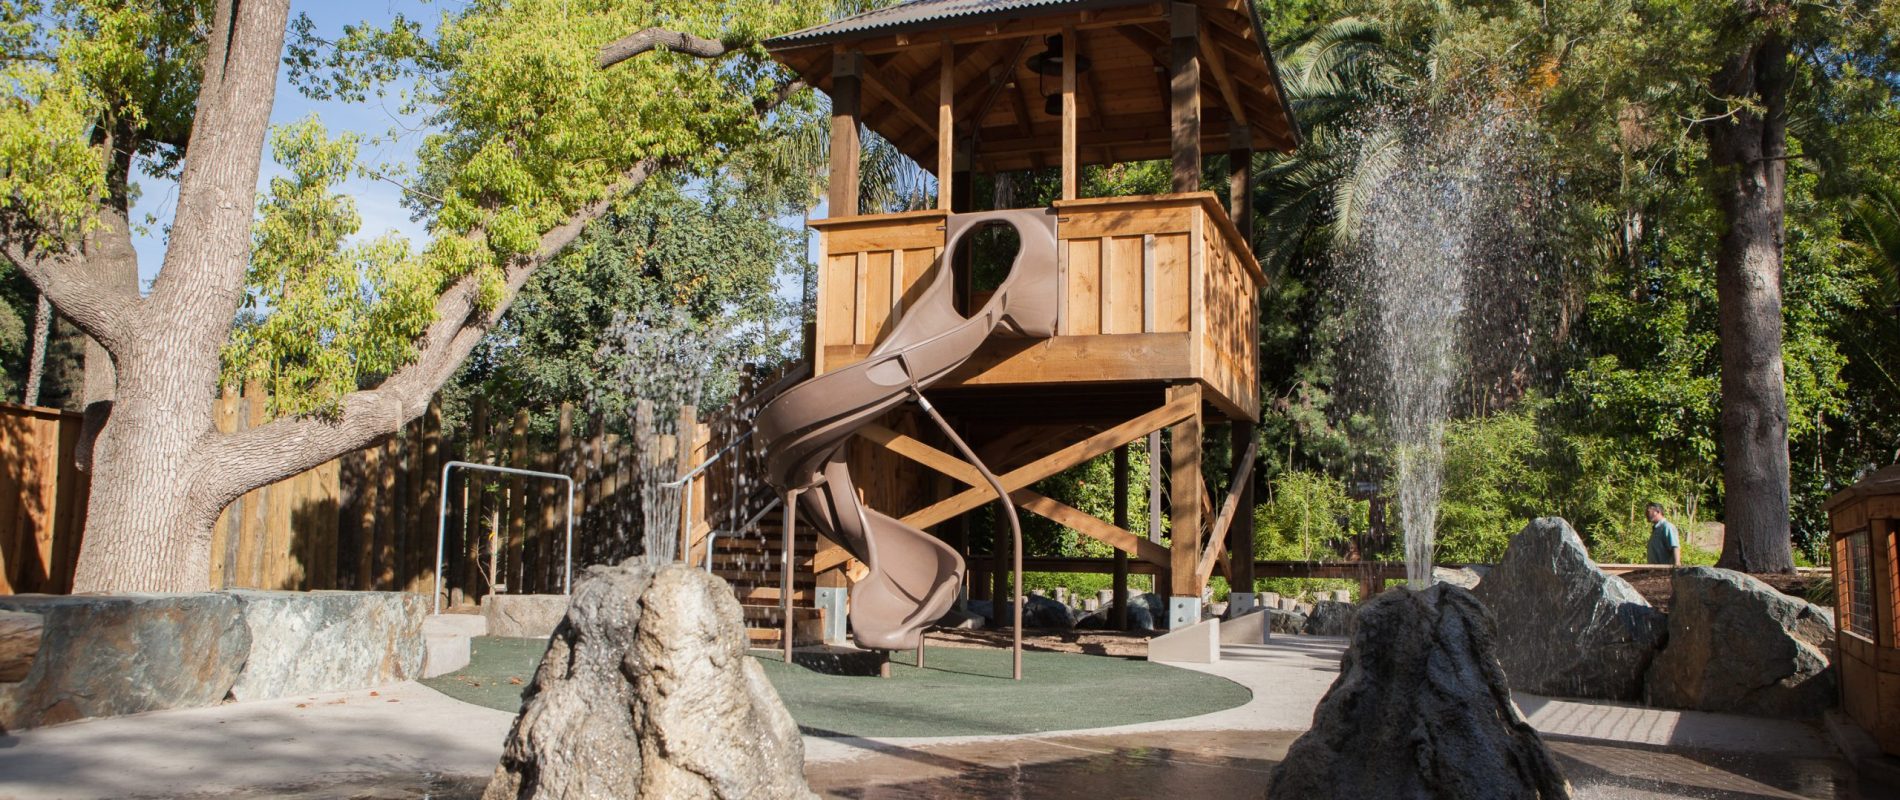 Wilderness Falls opening at Fresno Chaffee Zoo